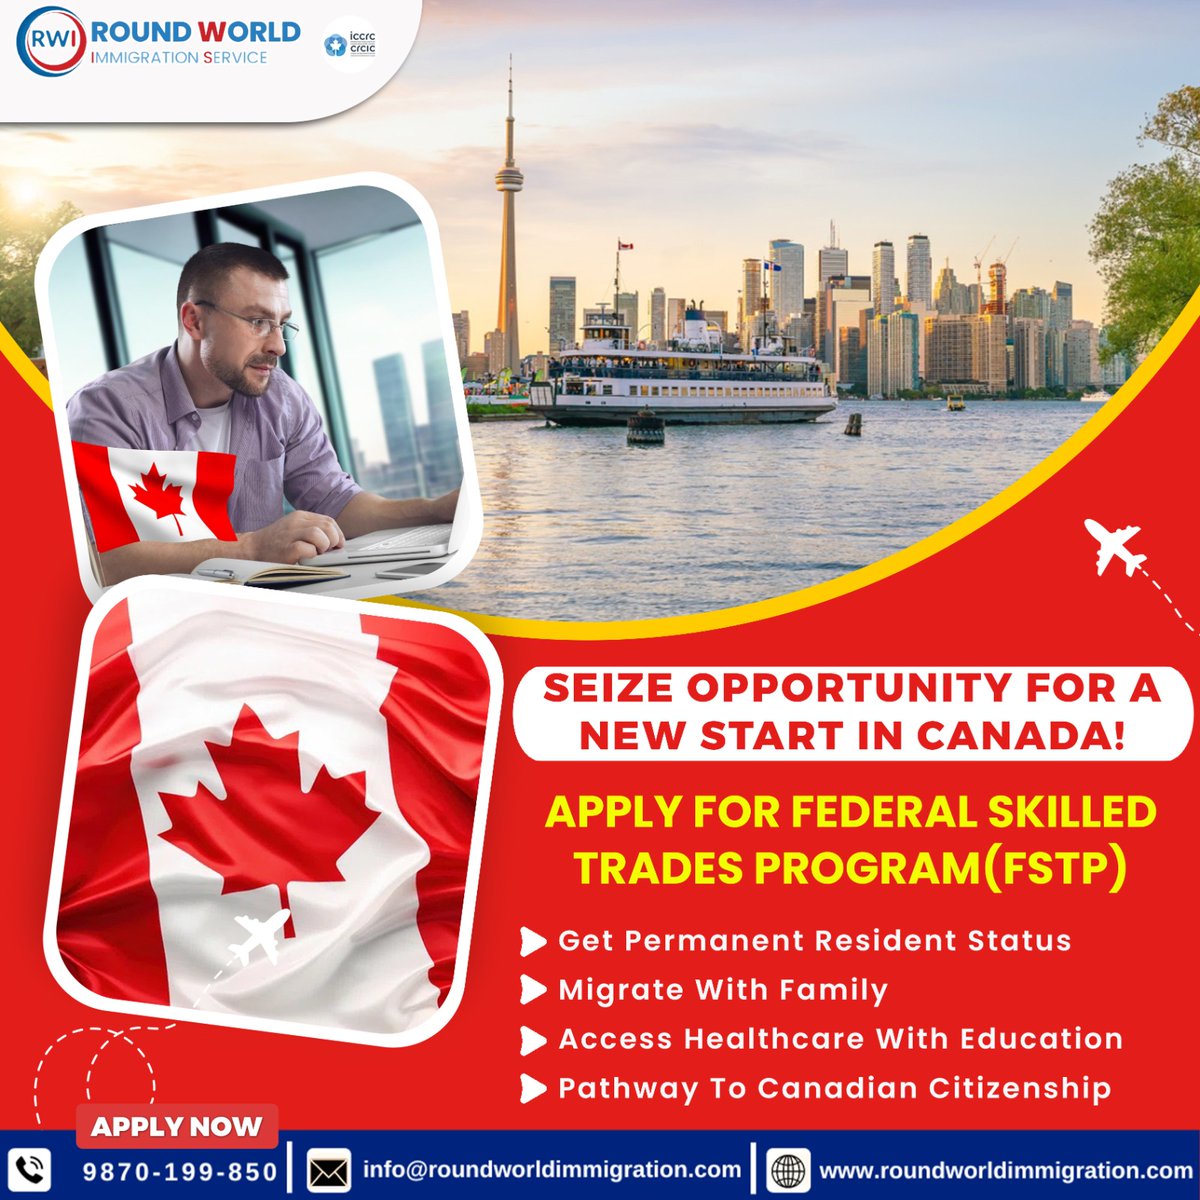 Seize Opportunity for a New Start in Canada!
Build Your Canadian Dream: Apply For Federal Skilled Trades Program (FSTP)

For further info just connect with us..
Call Now - 098701 99850📲

#CanadaNeedsTrades #FSTP #SkilledTrades #roundworldimmigrationservices #CanadianDream